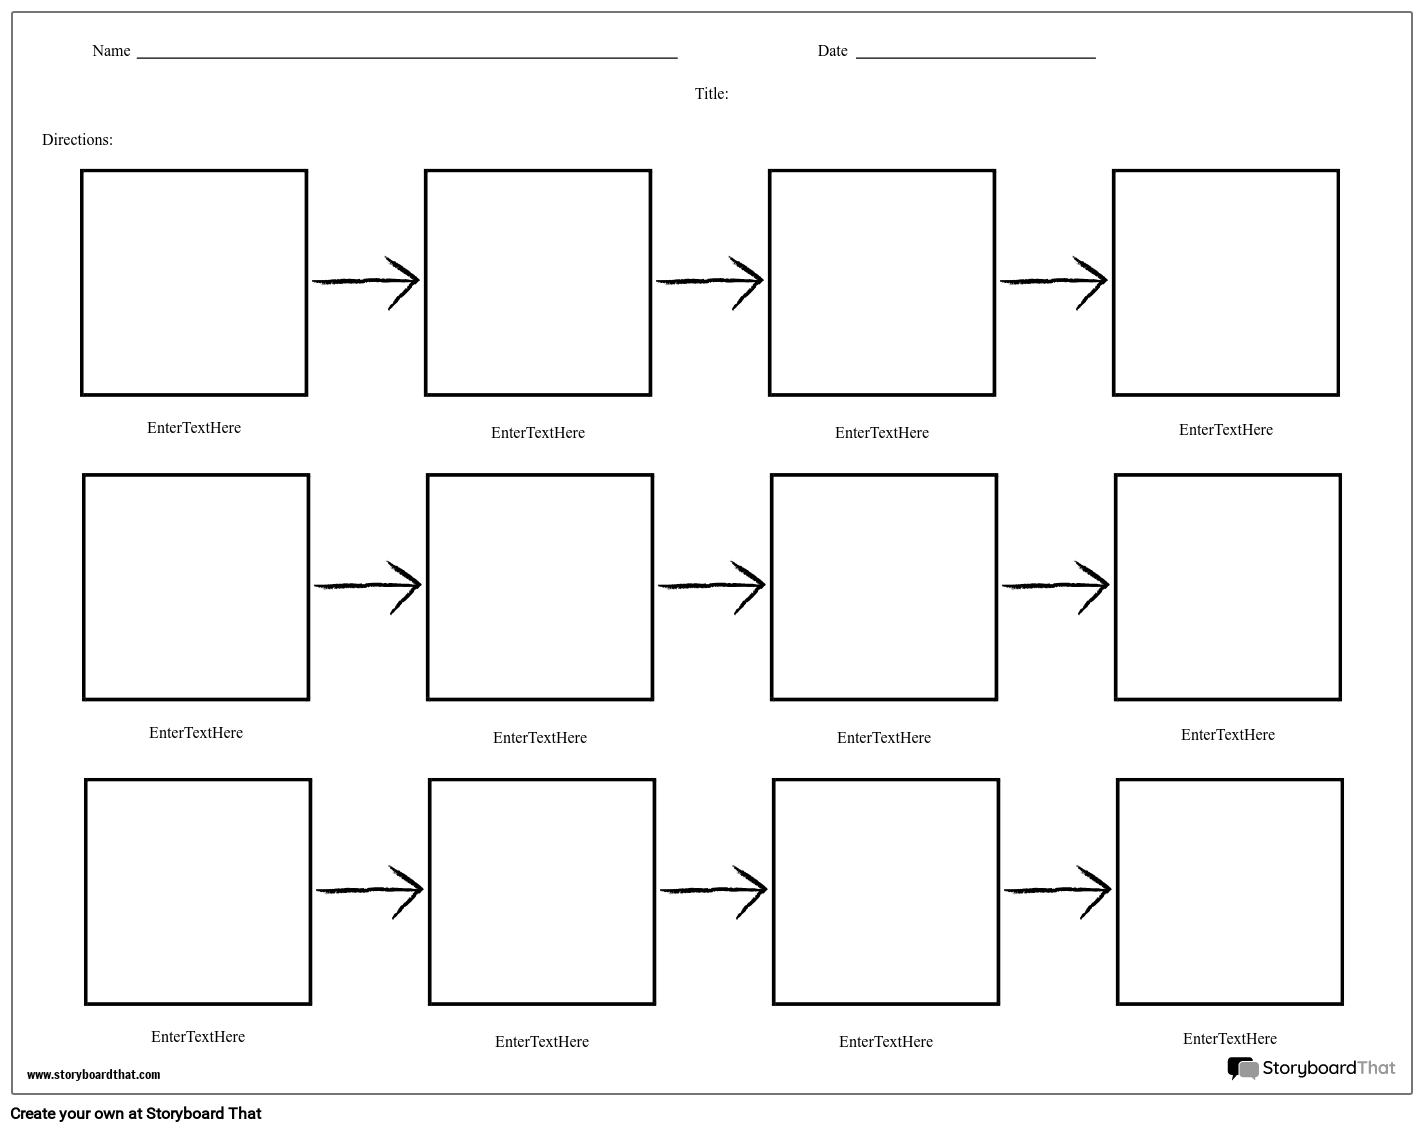 create-flow-chart-worksheets-flow-chart-graphic-organizer